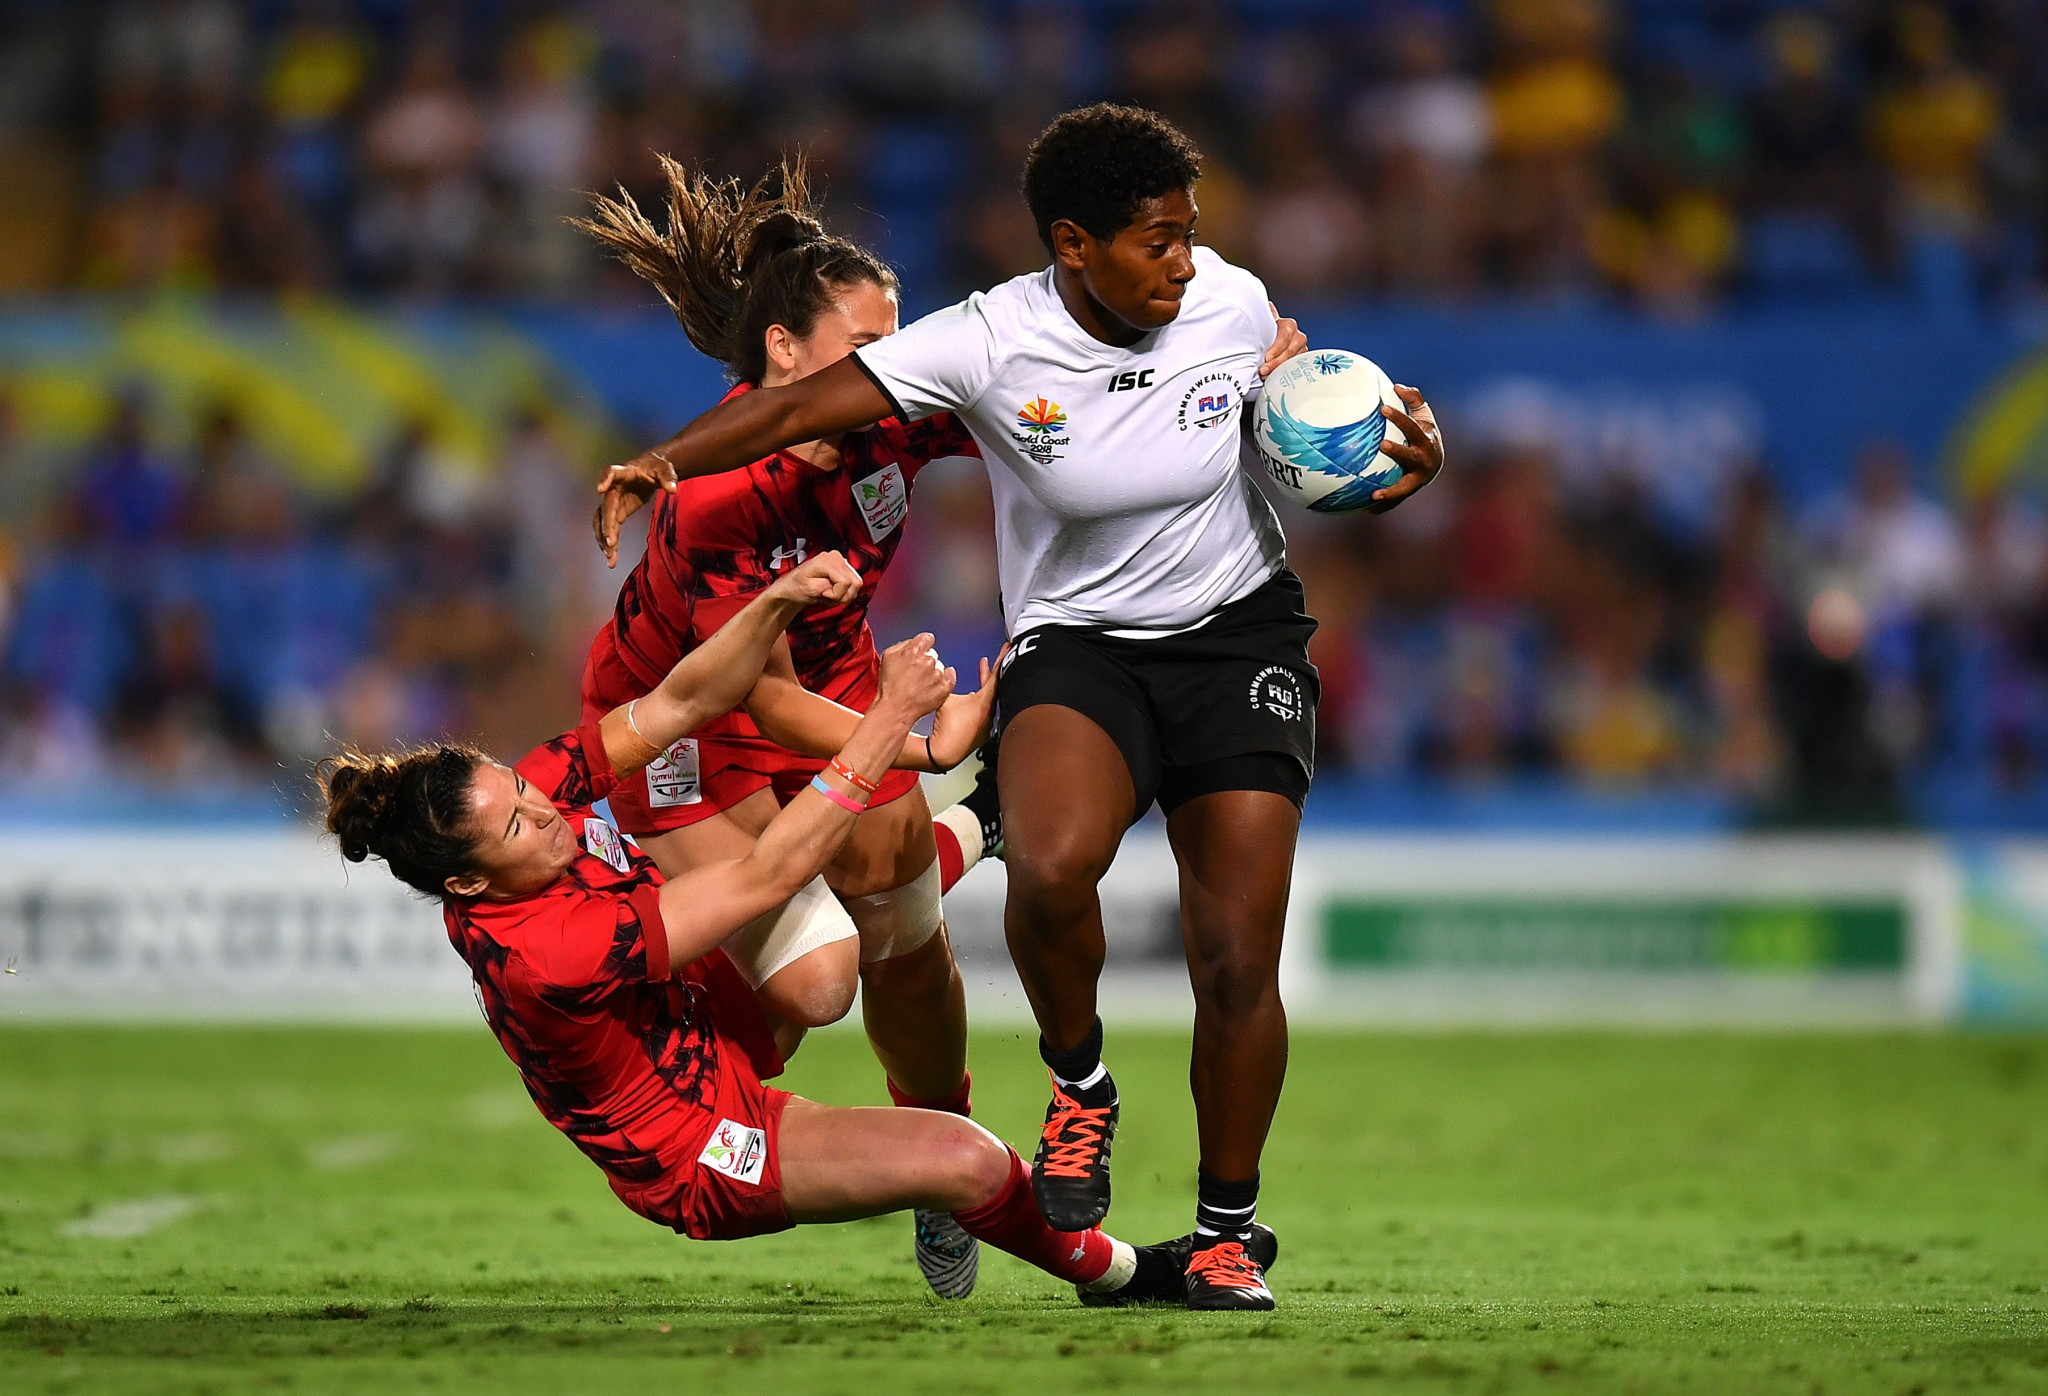 Rugby sevens competition begun today with the women's event making its debut on the Commonwealth Games programme ©Getty Images